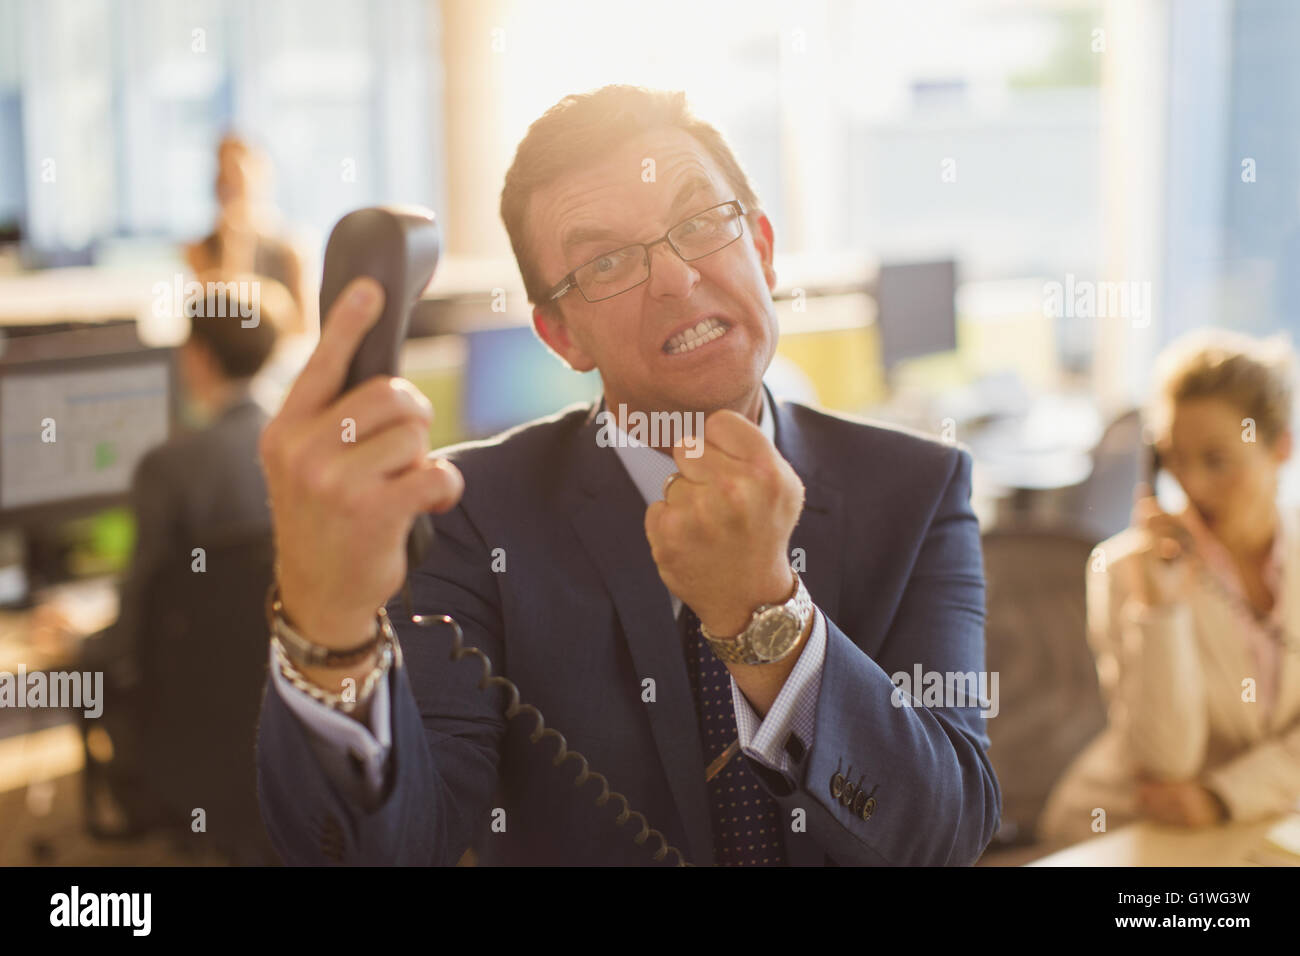 Furious businessman gesturing with fist at telephone in office Stock Photo